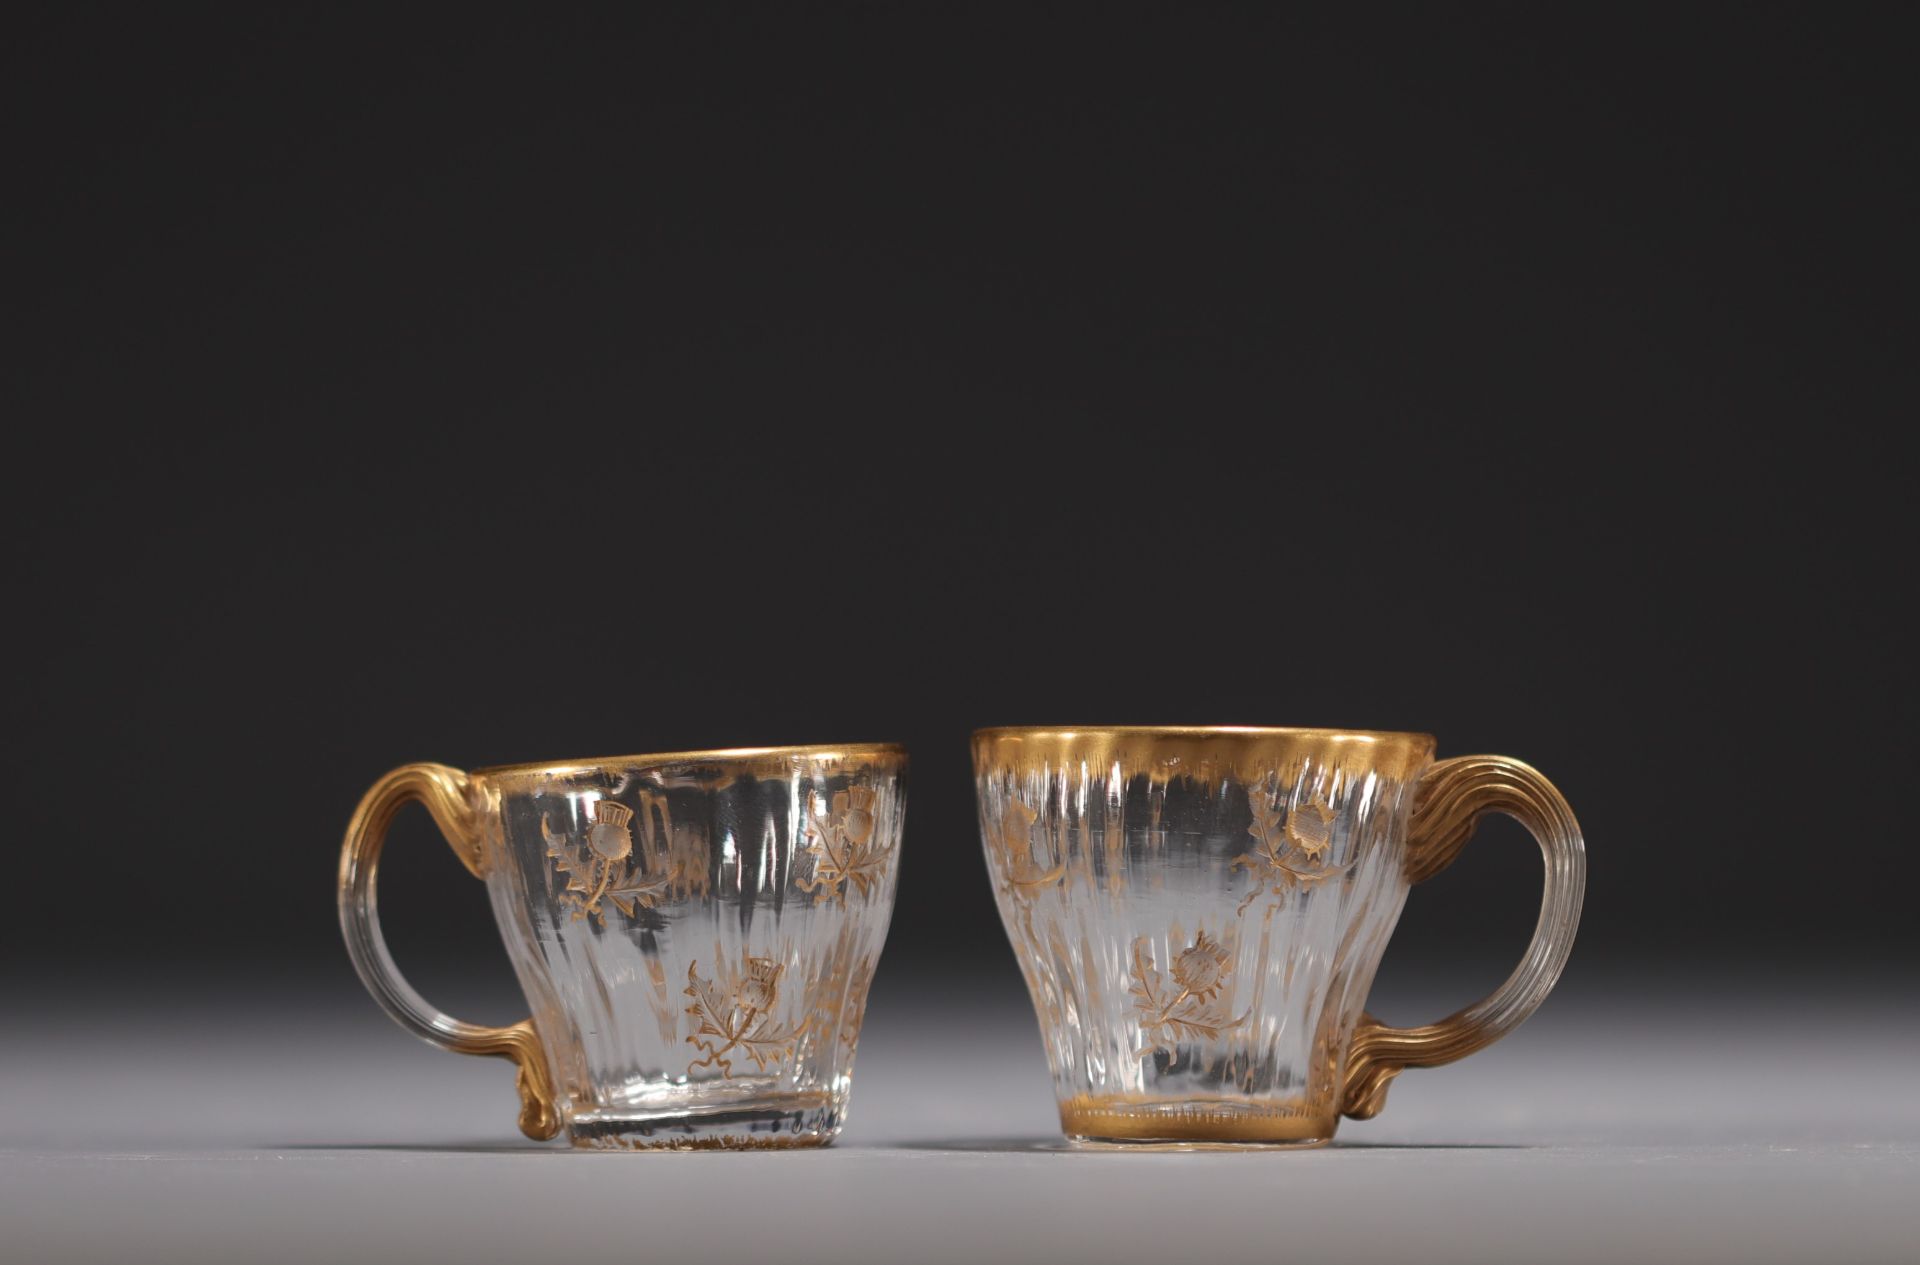 DAUM Nancy - Pair of small glass cups with engraved thistle design enhanced with gold, signed.